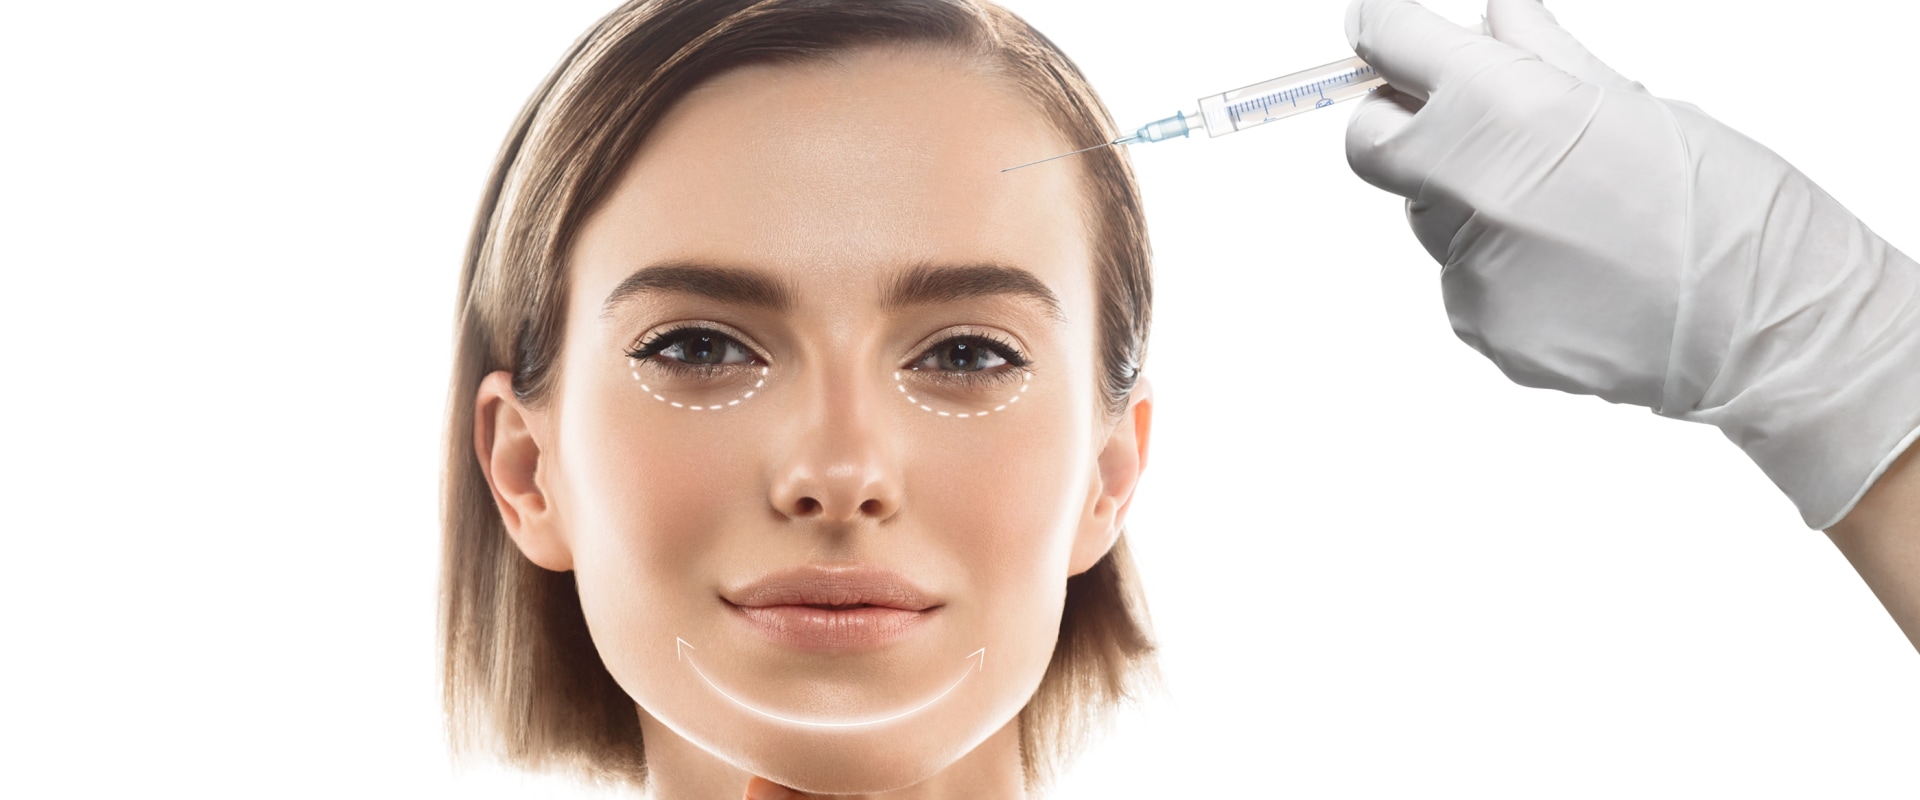 Are stem cell injections worth it?